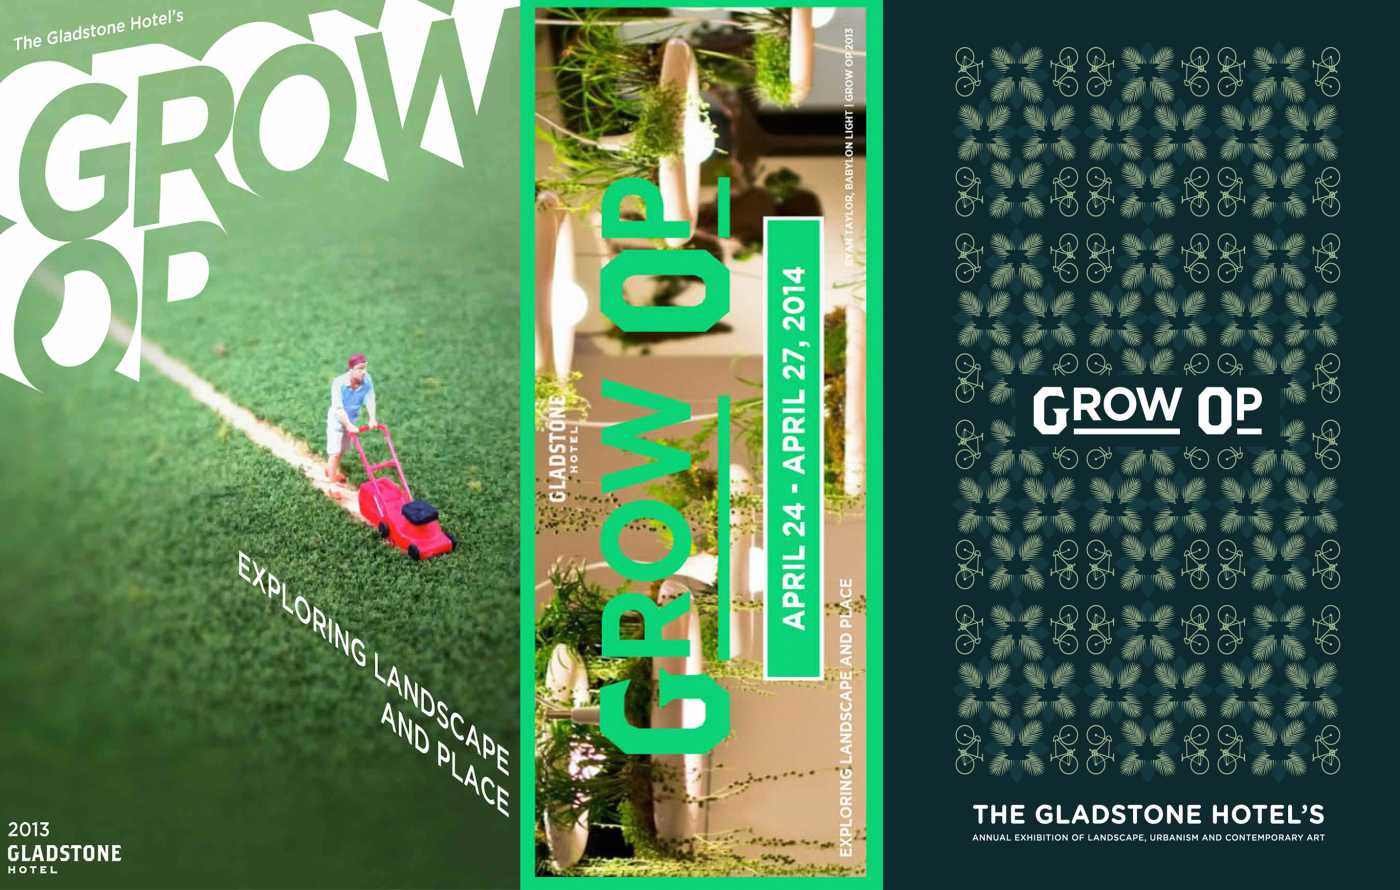 Grow Op at the Gladstone Hotel